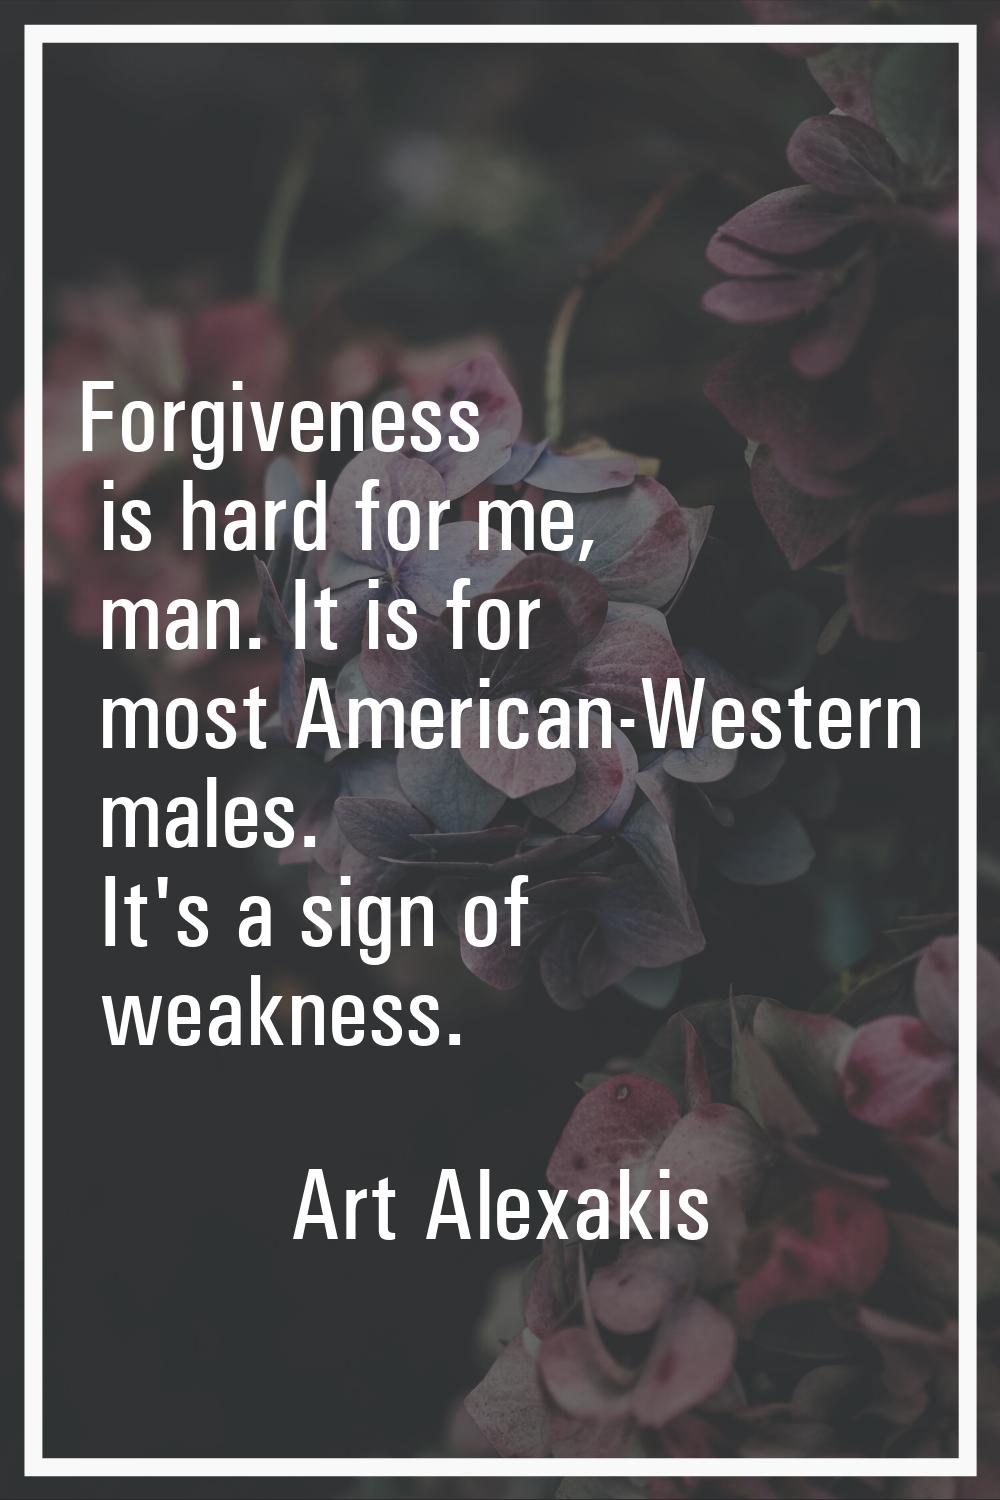 Forgiveness is hard for me, man. It is for most American-Western males. It's a sign of weakness.